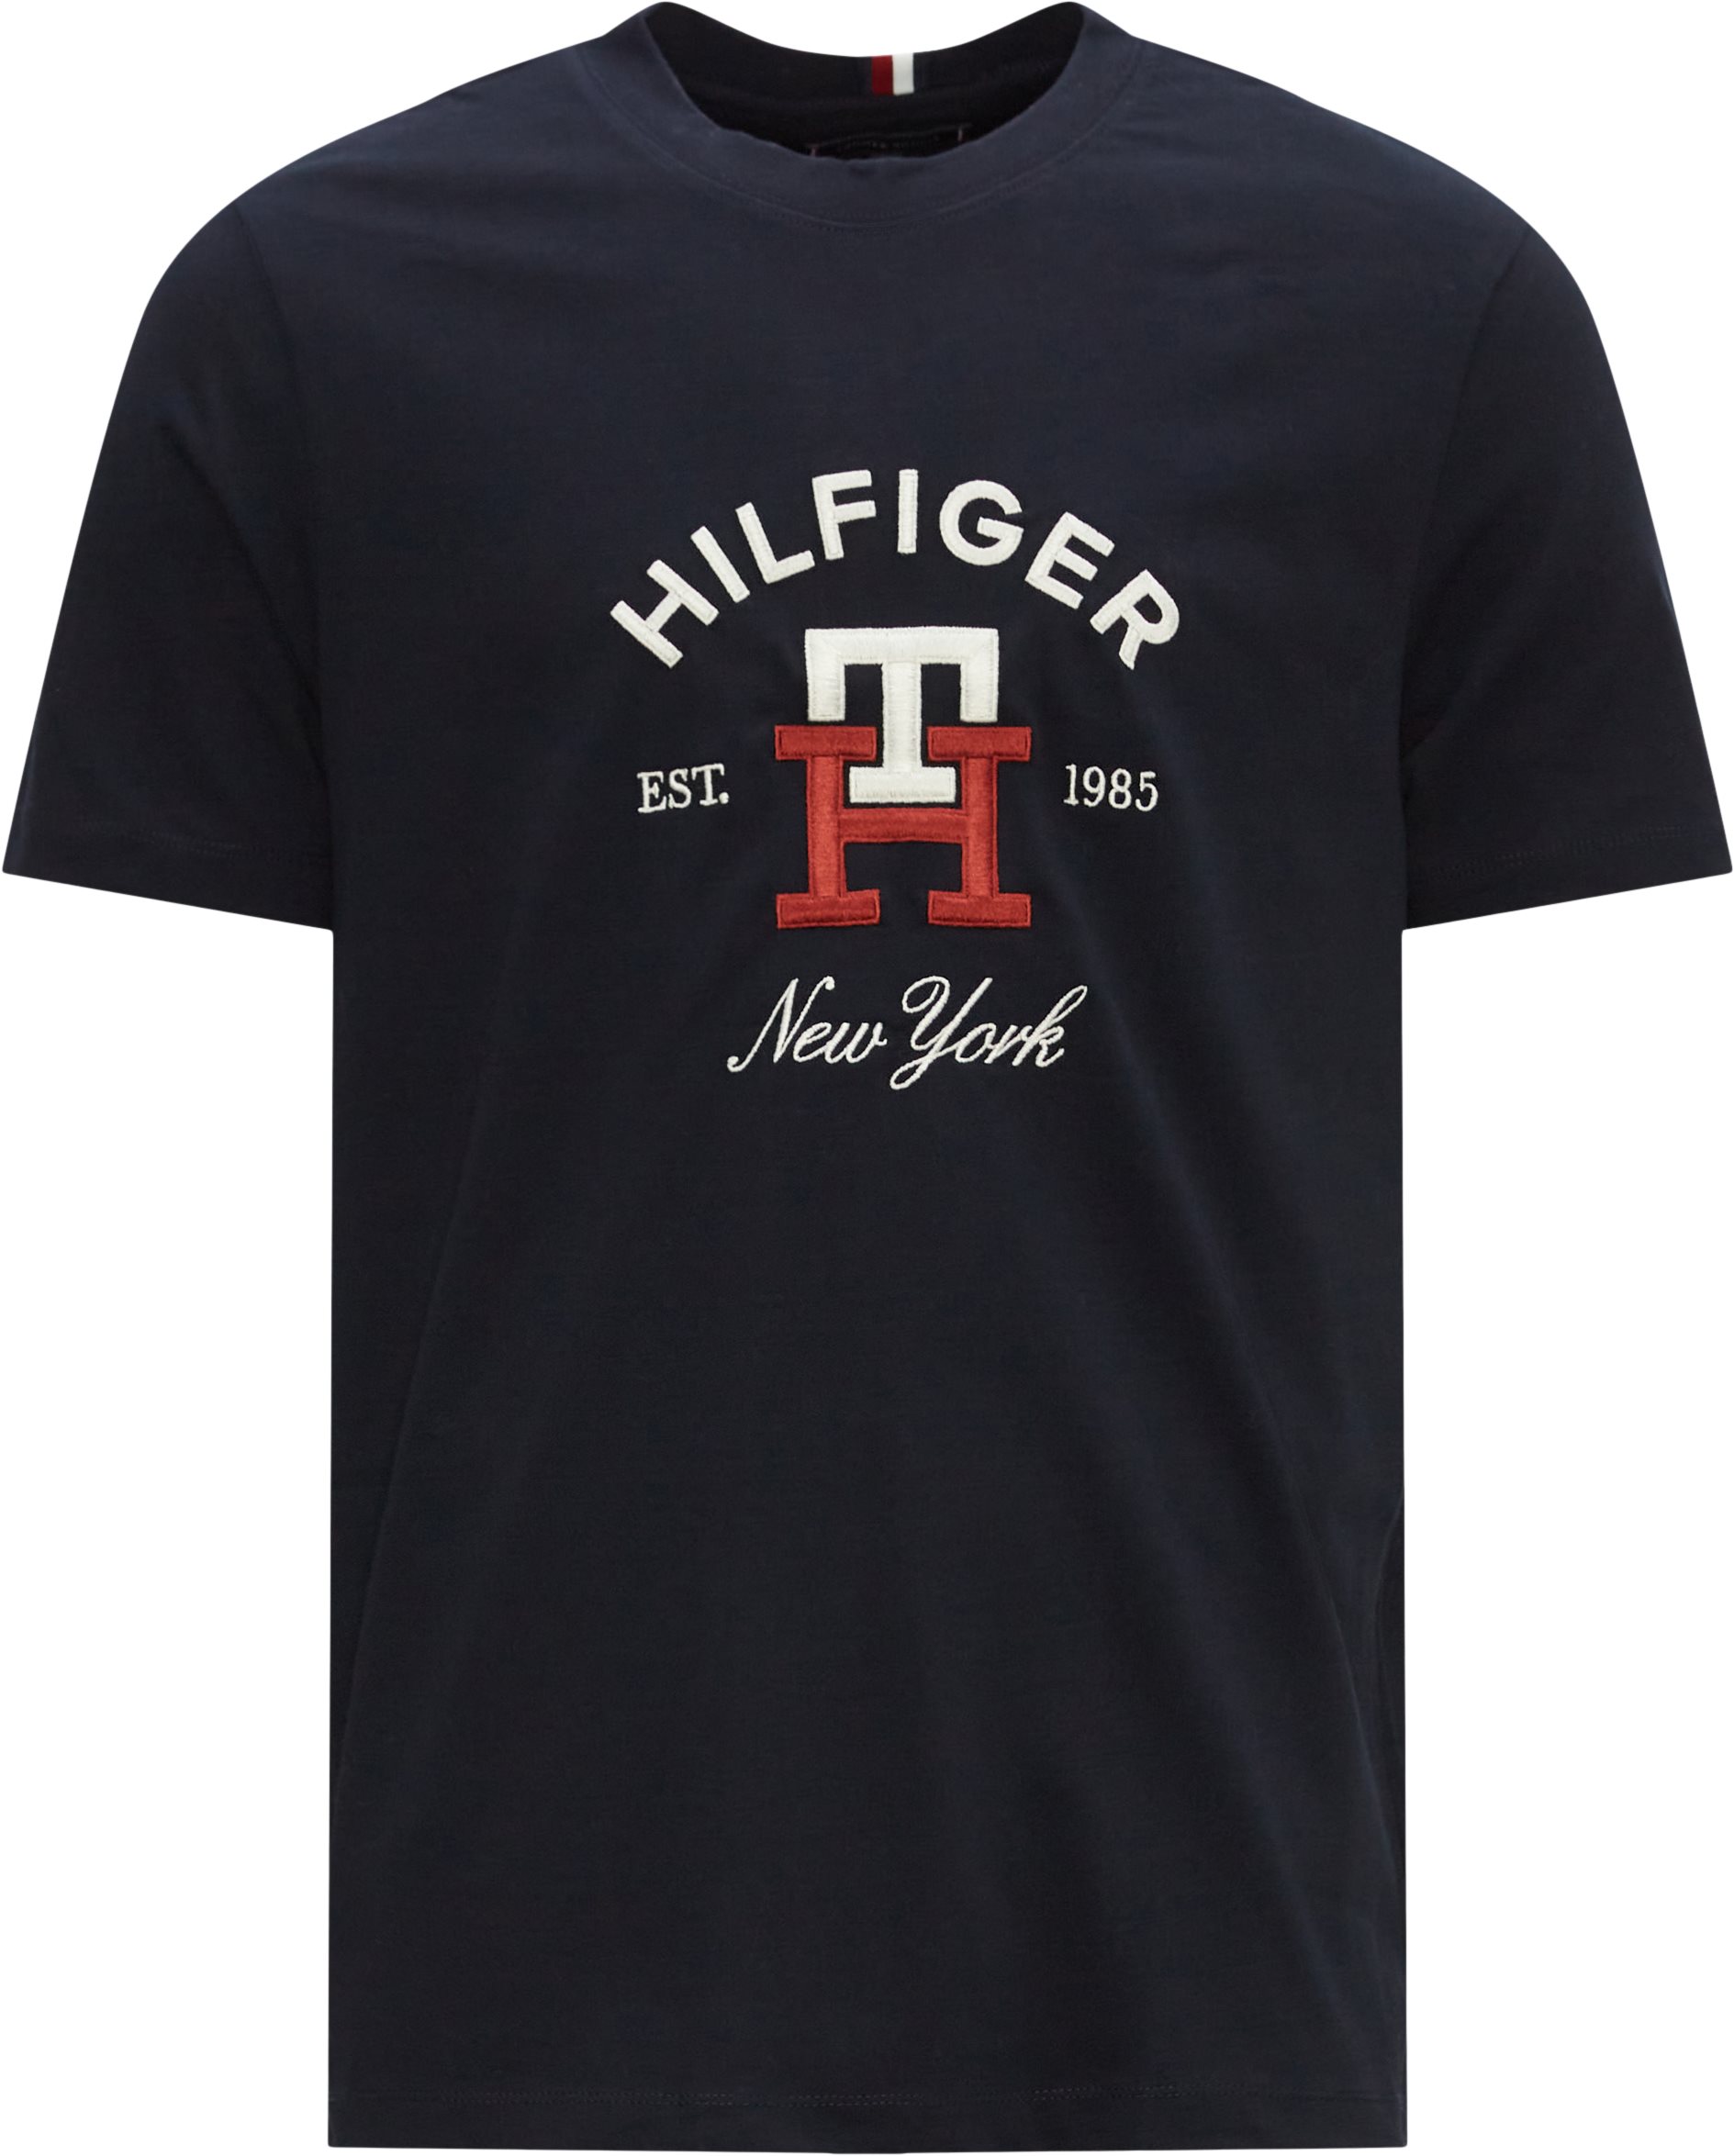 EUR Tommy T-shirts MONOGRAM 30043 Hilfiger NAVY TEE CURVED from 40